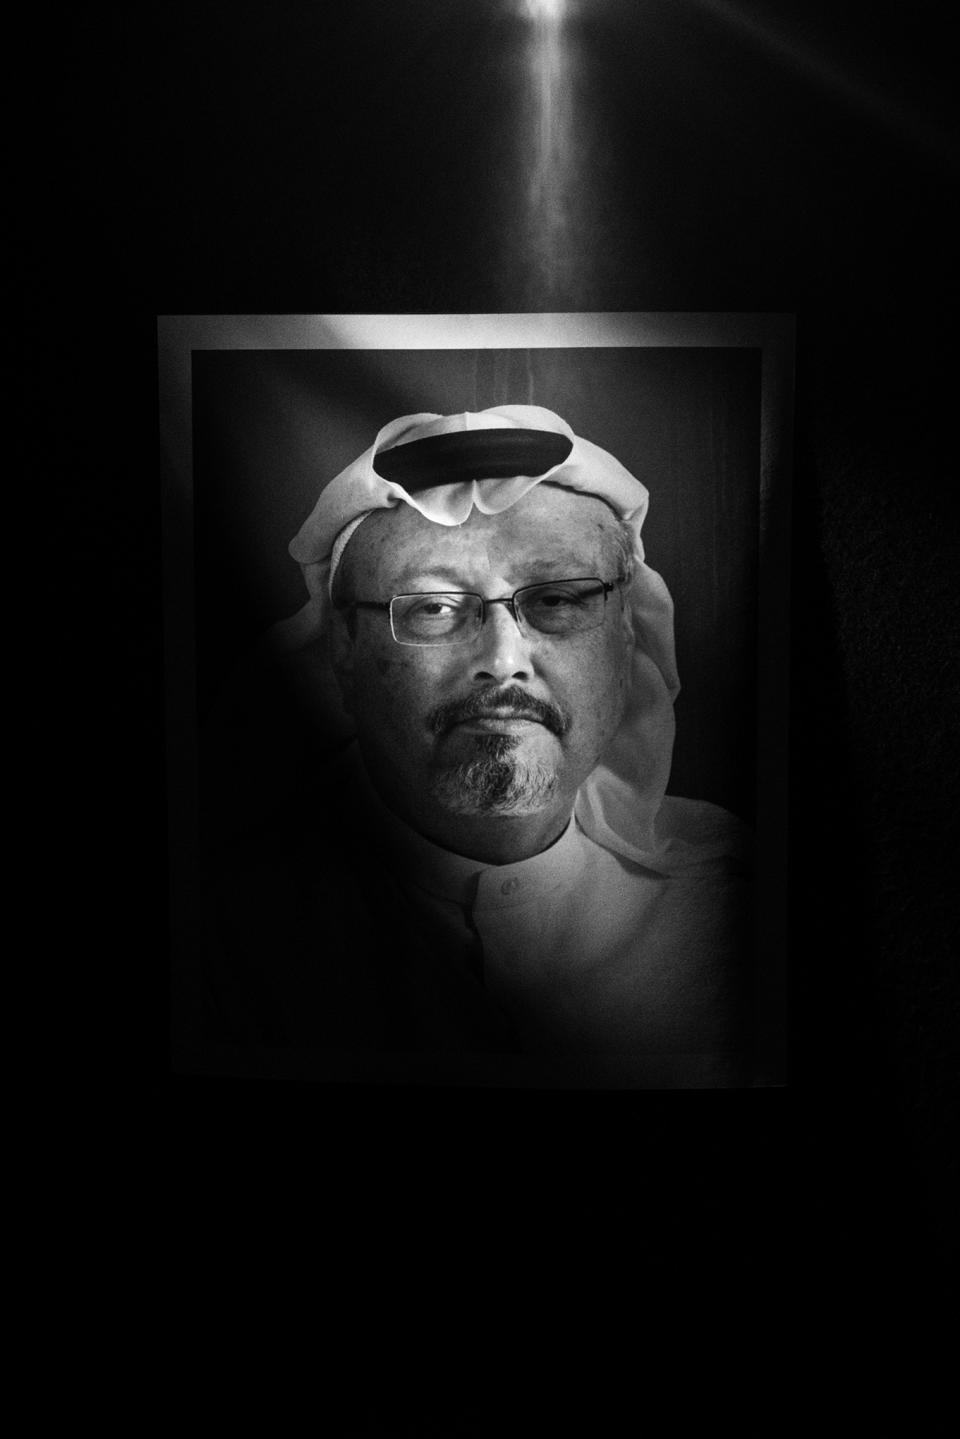 Khashoggi was a leading journalist in Saudi Arabia for decades before fleeing to the U.S. in 2017. In columns for the Washington Post, he criticized Crown Prince Mohammed bin Salman’s quest for total power and suppression of free speech. On Oct. 2, Khashoggi was murdered by agents of the kingdom inside its Istanbul consulate, while his fiancée waited for him outside.